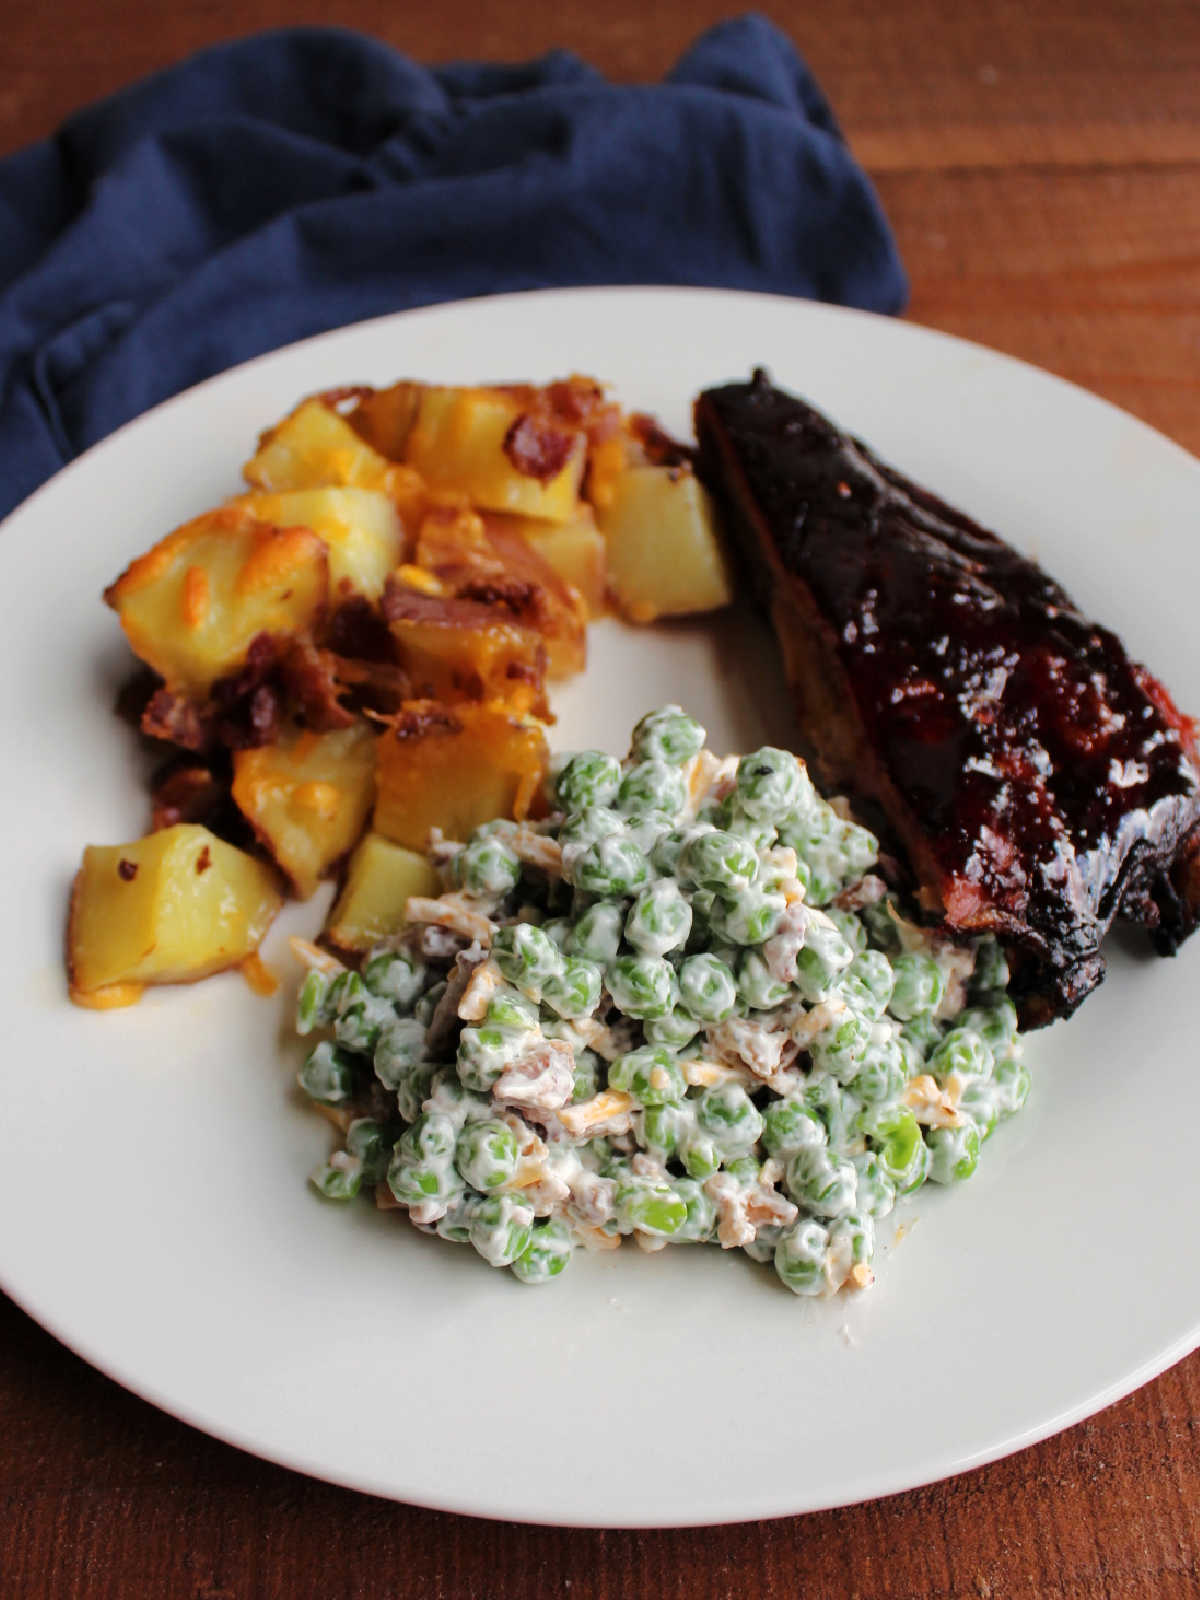 Pea salad served with BBQ ribs and cheesy potatoes with bacon.